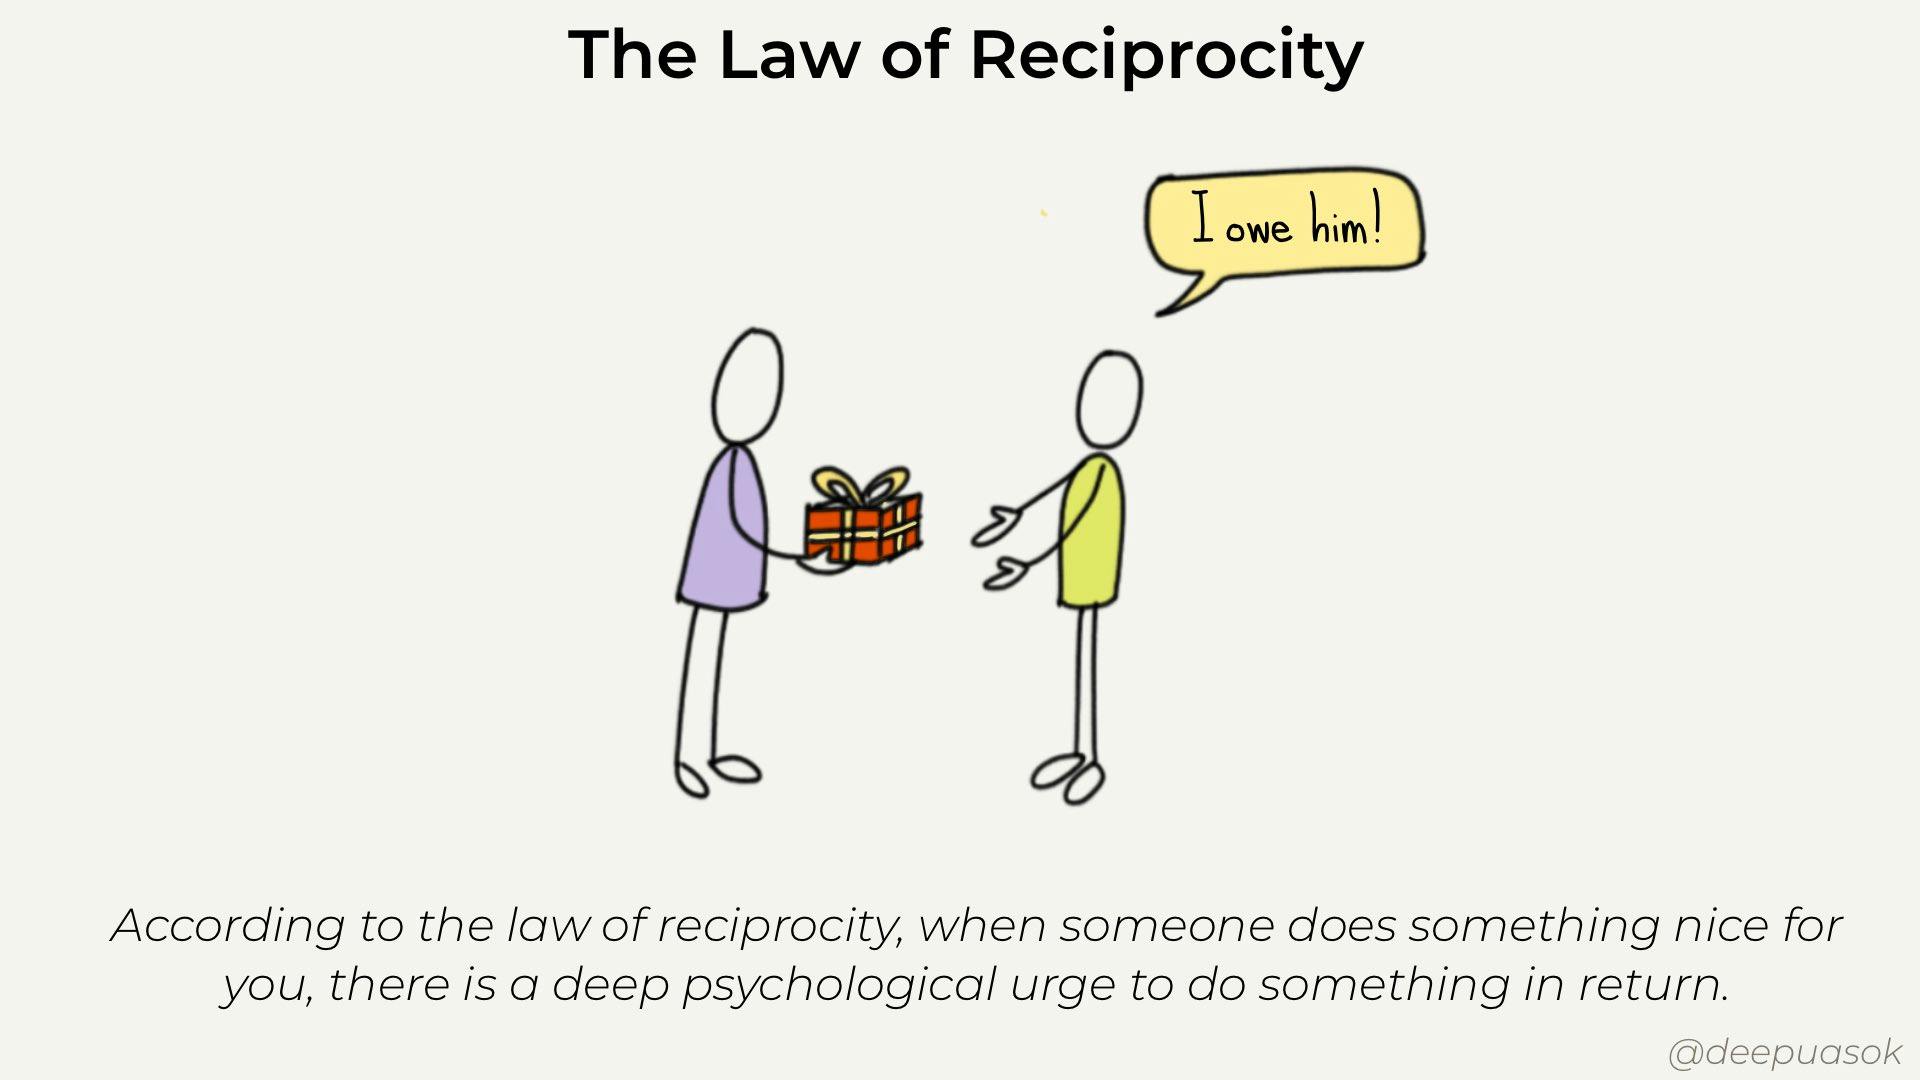 visual about the law of reciprocity